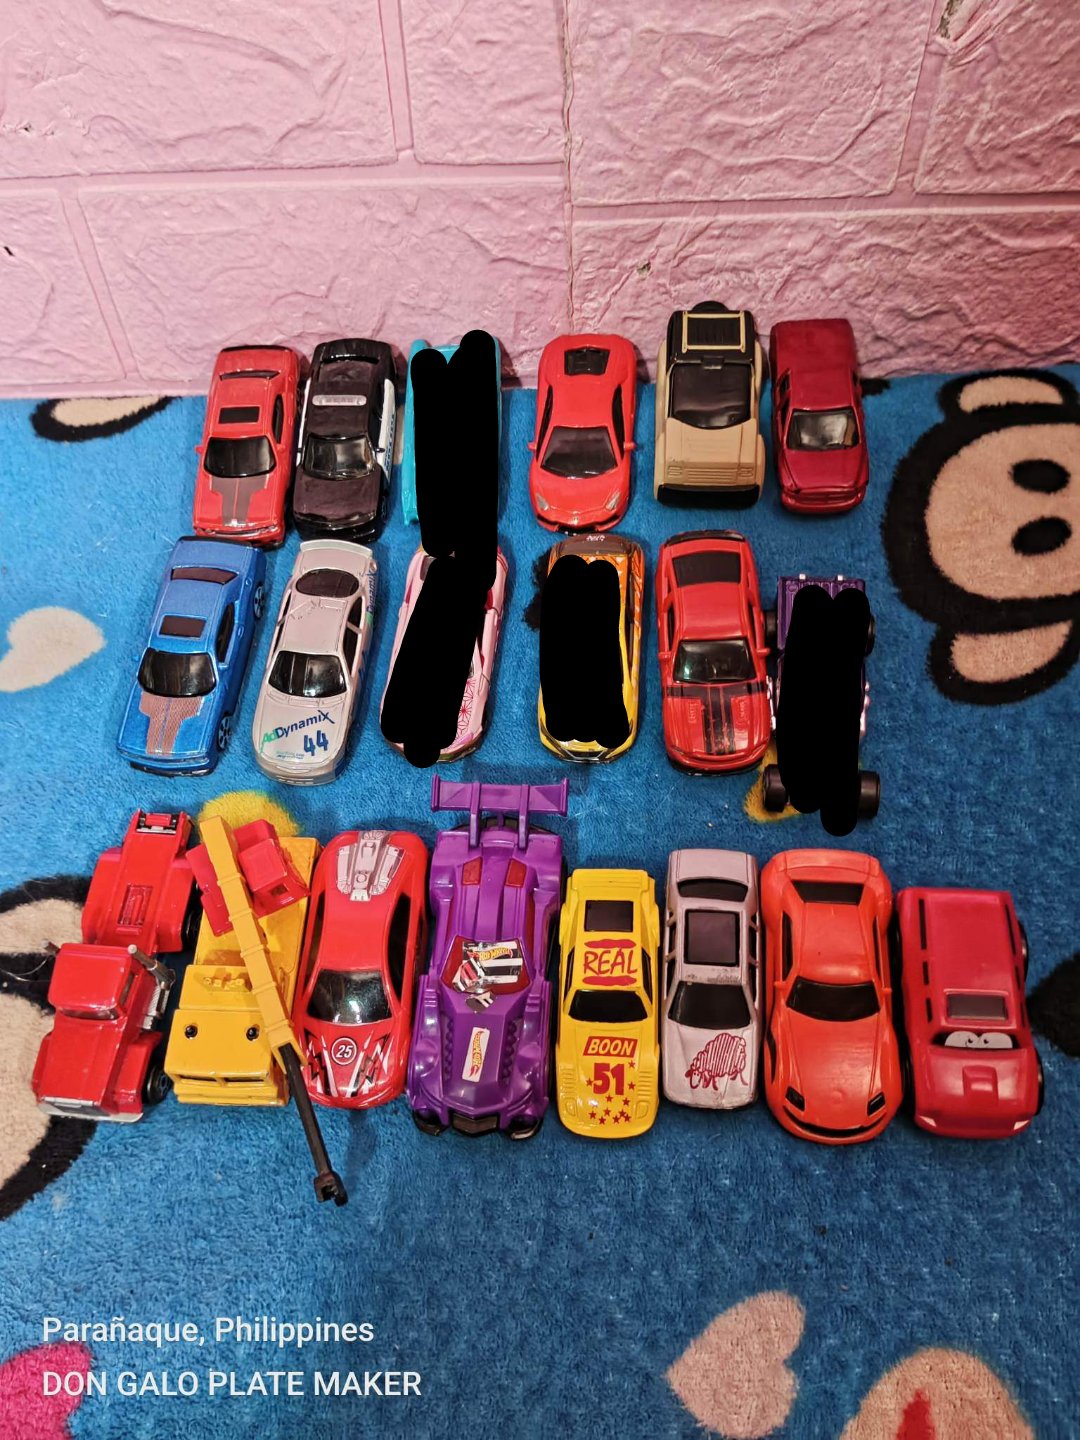 diecast　toy　take　Lazada　PH　And　cars　all　hindi